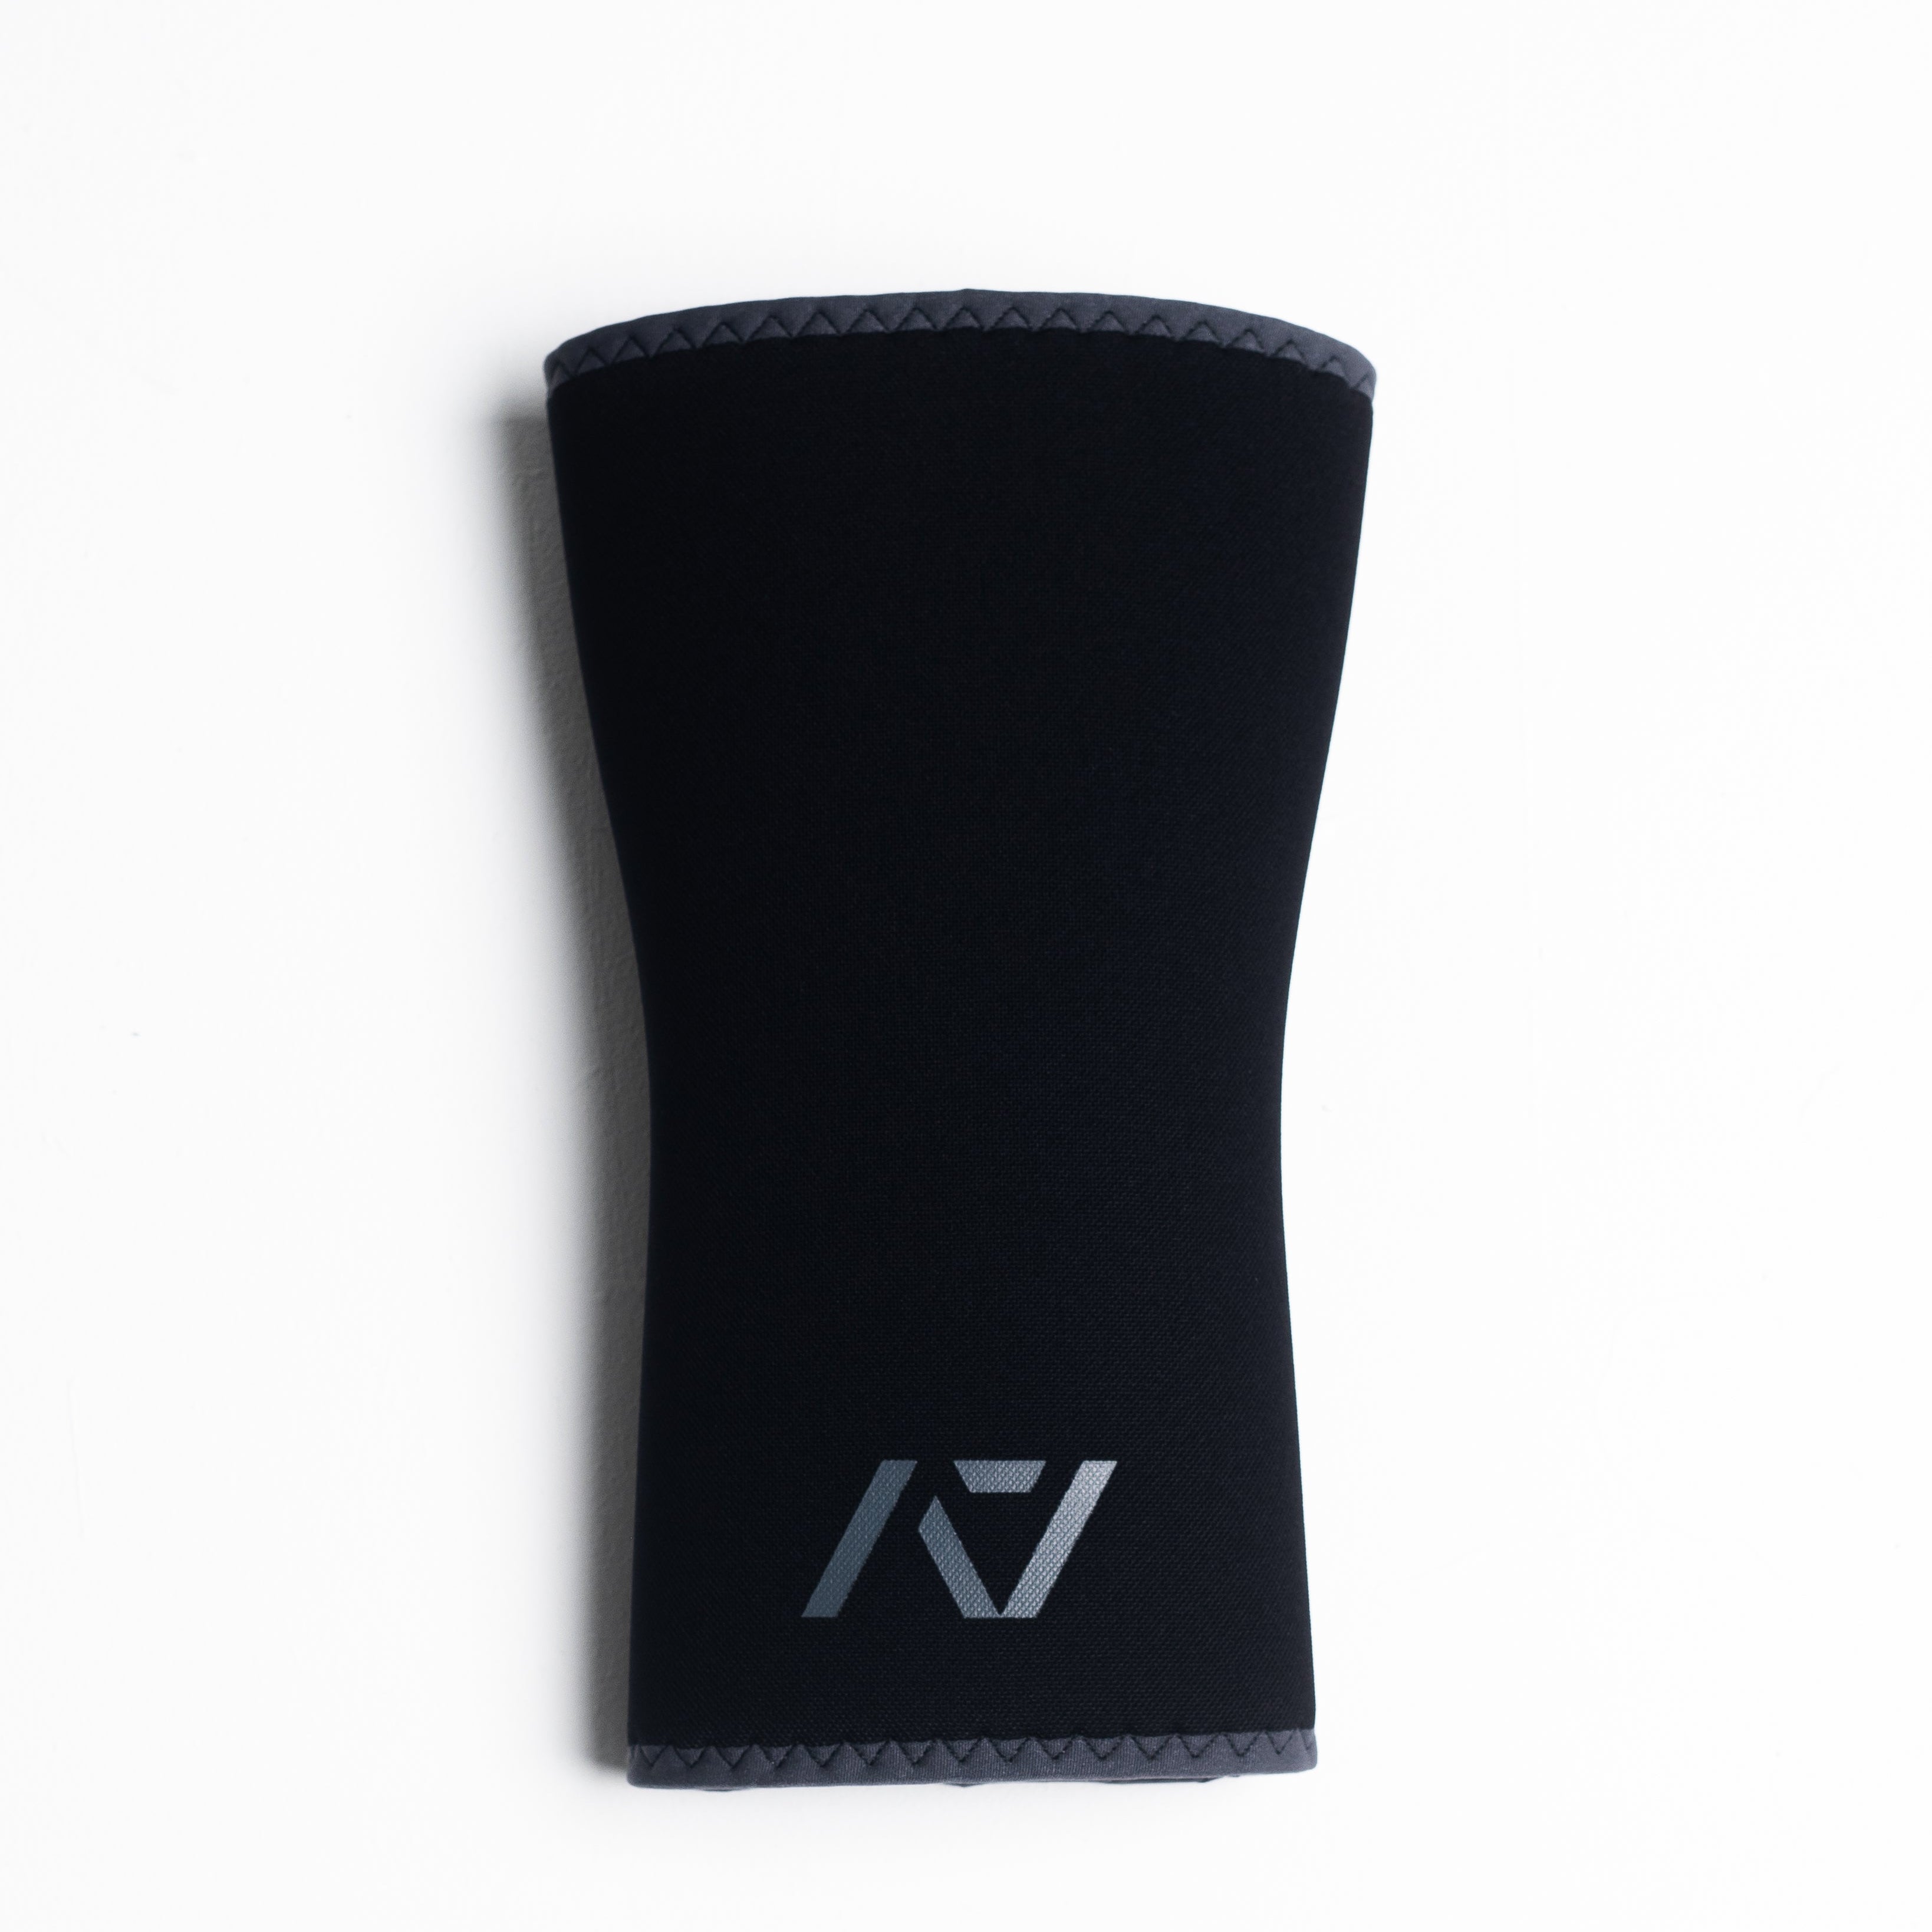 A7 IPF Approved Hourglass Knee Sleeves feature an hourglass-shaped taper fit to provide knee compression while maintaining proper tightness around the calf and quad, offered in three stiffnesses (Flexi, Stiff and Rigor Mortis). The IPF Approved Kit includes Powerlifting Singlet, A7 Meet Shirt, A7 Zebra Wrist Wraps, A7 Deadlift Socks, Hourglass Knee, IPF Approved PAL Lever. Genouillères powerlifting shipping to France, Spain, Ireland, Germany, Italy, Sweden and EU. 